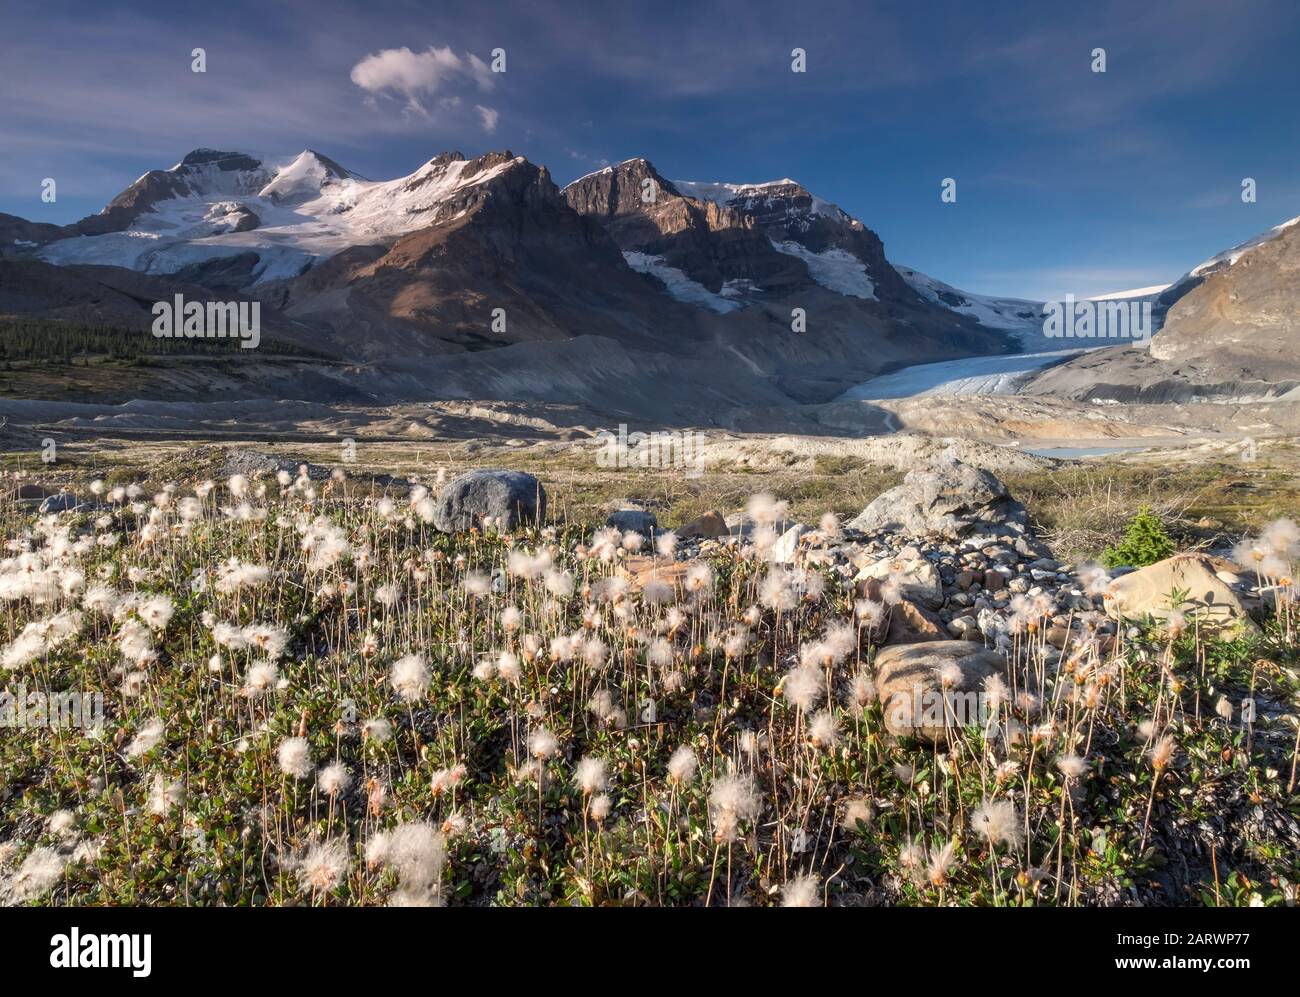 Cotton Grass & Moraines below the Athabasca Glacier, backed by Mount Athabasca & Mount Andromeda, Jasper National Park, Canadian Rockies, Canada Stock Photo